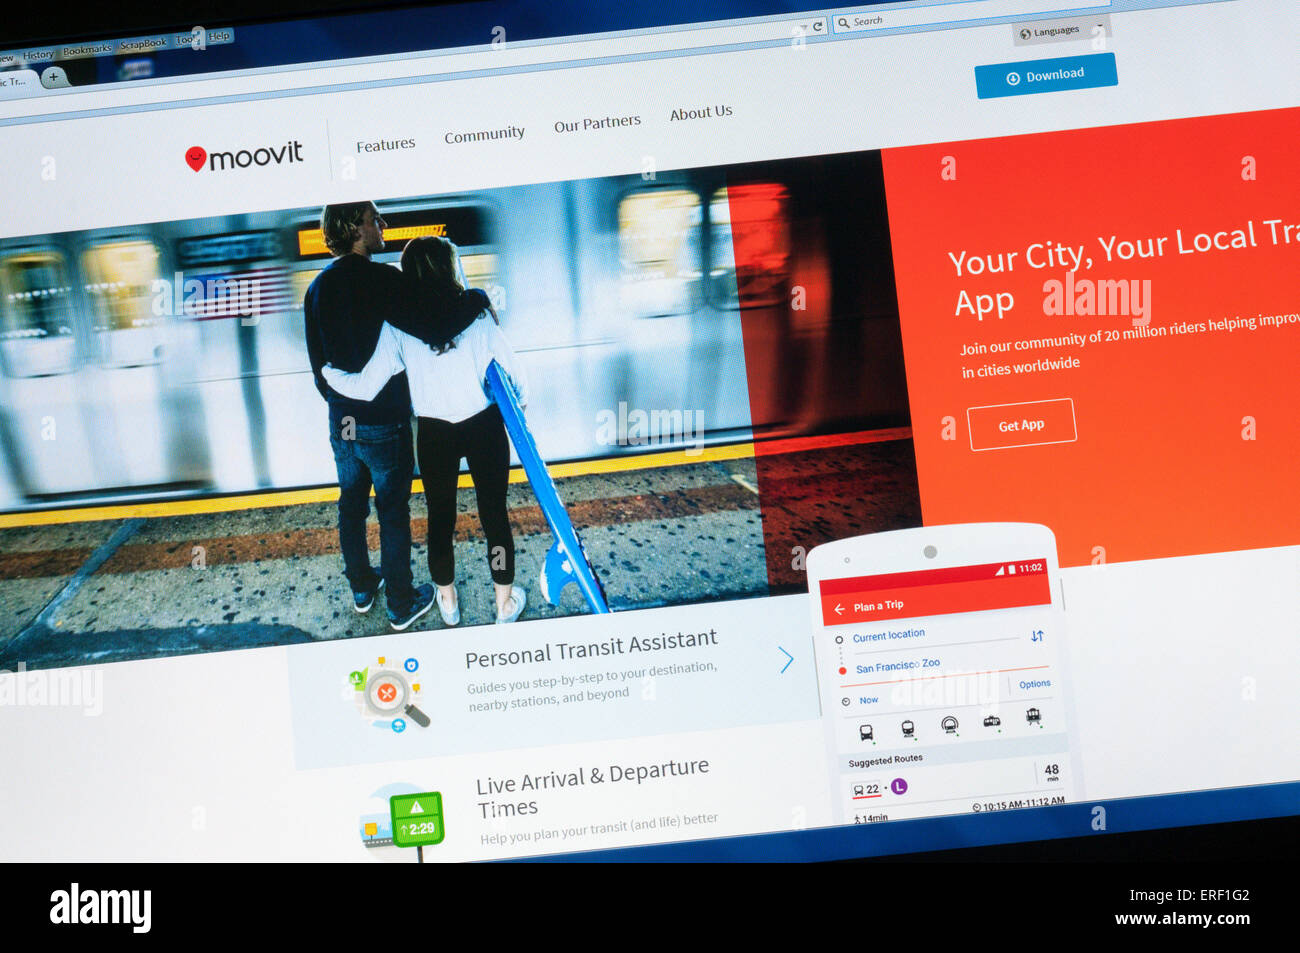 The home page of the Moovit journey planning app. Stock Photo